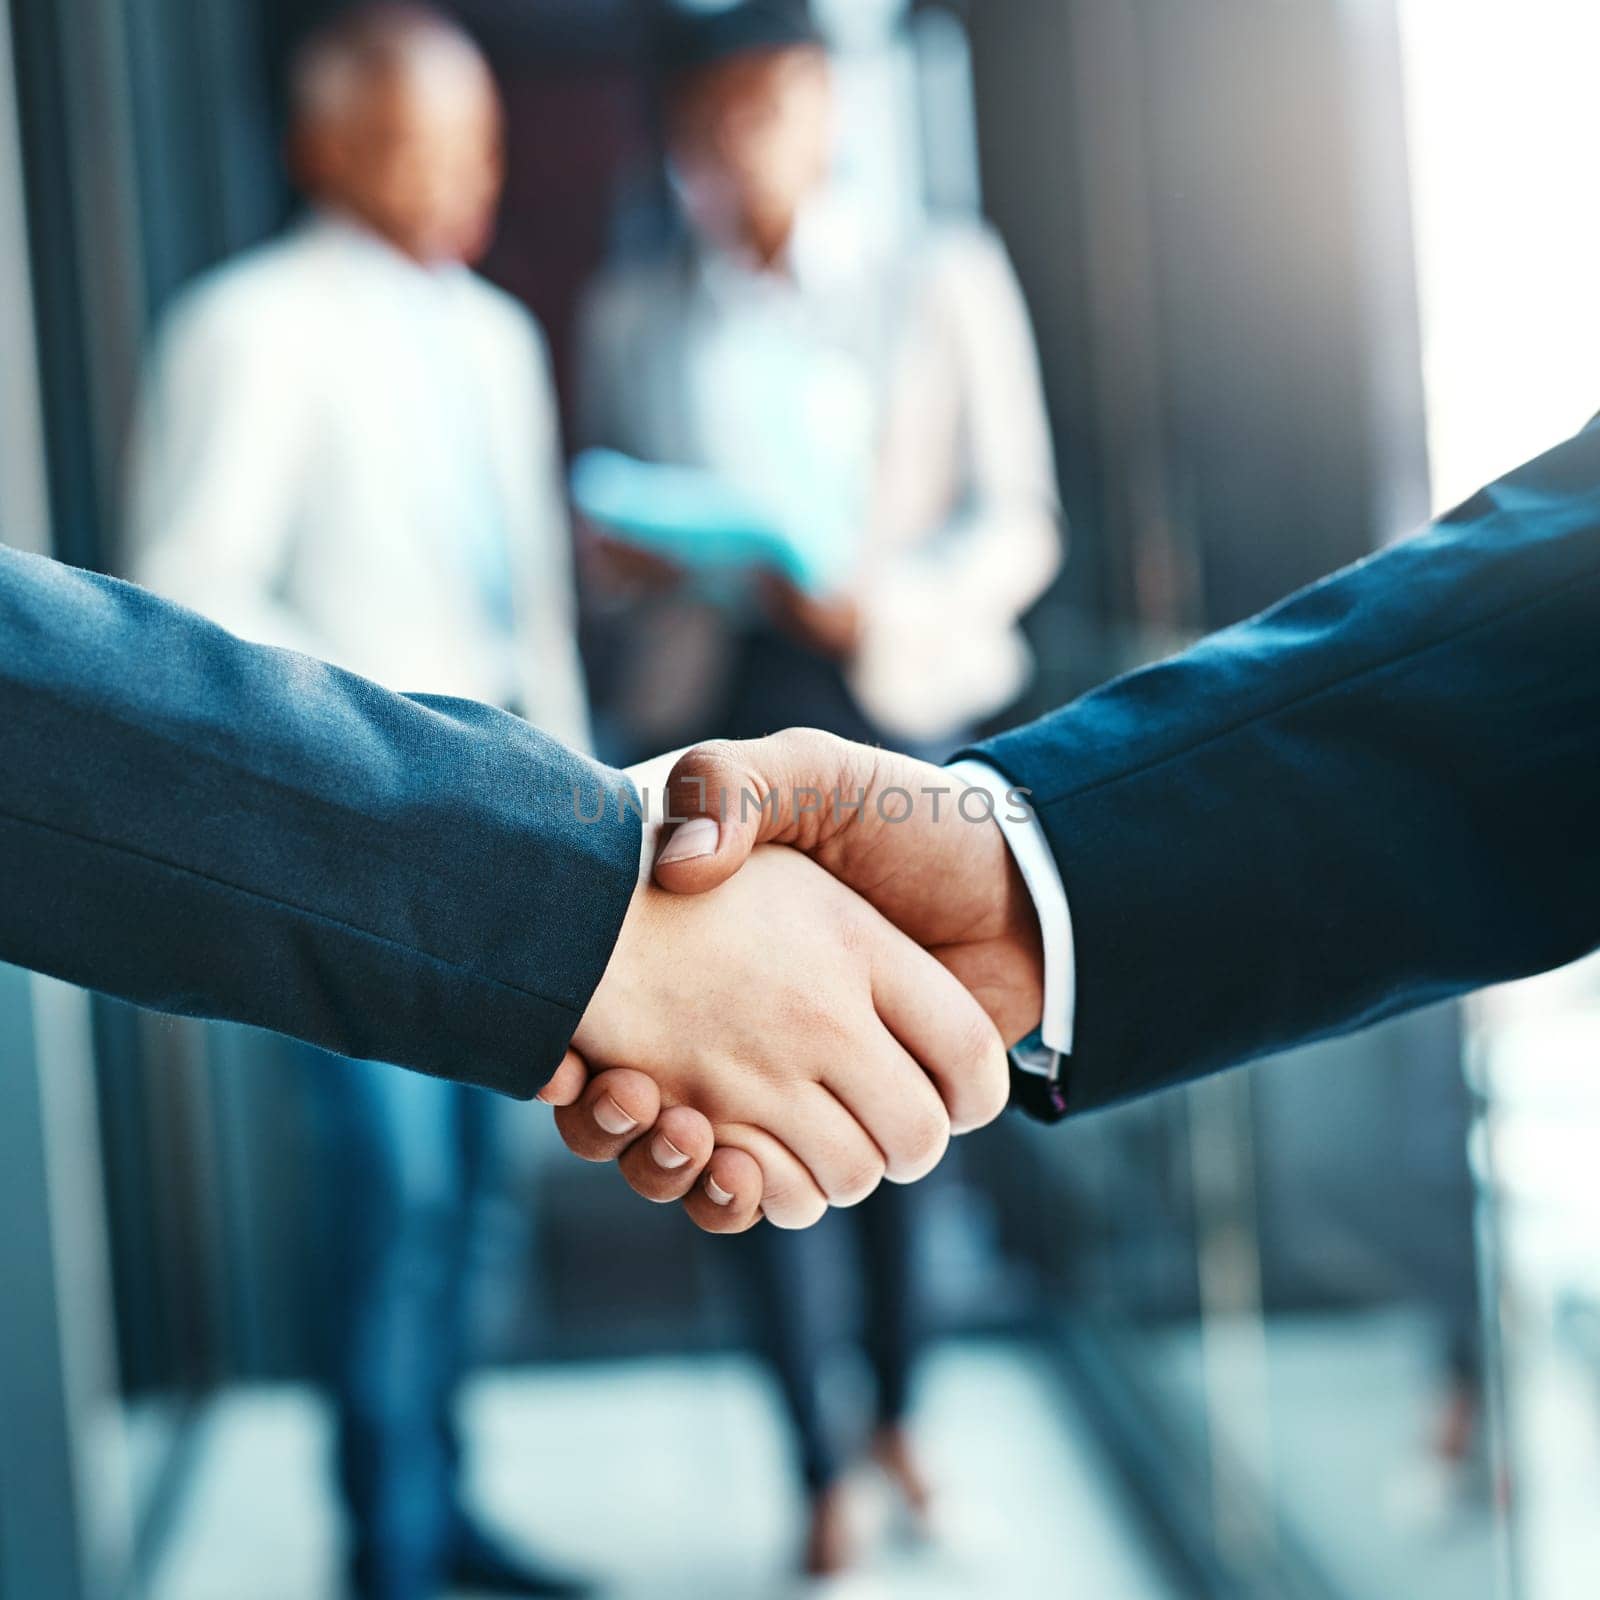 Handshake, business people with agreement and support with networking, welcome and introduction. Hiring, recruitment and promotion, corporate team shaking hands and partnership with collaboration.